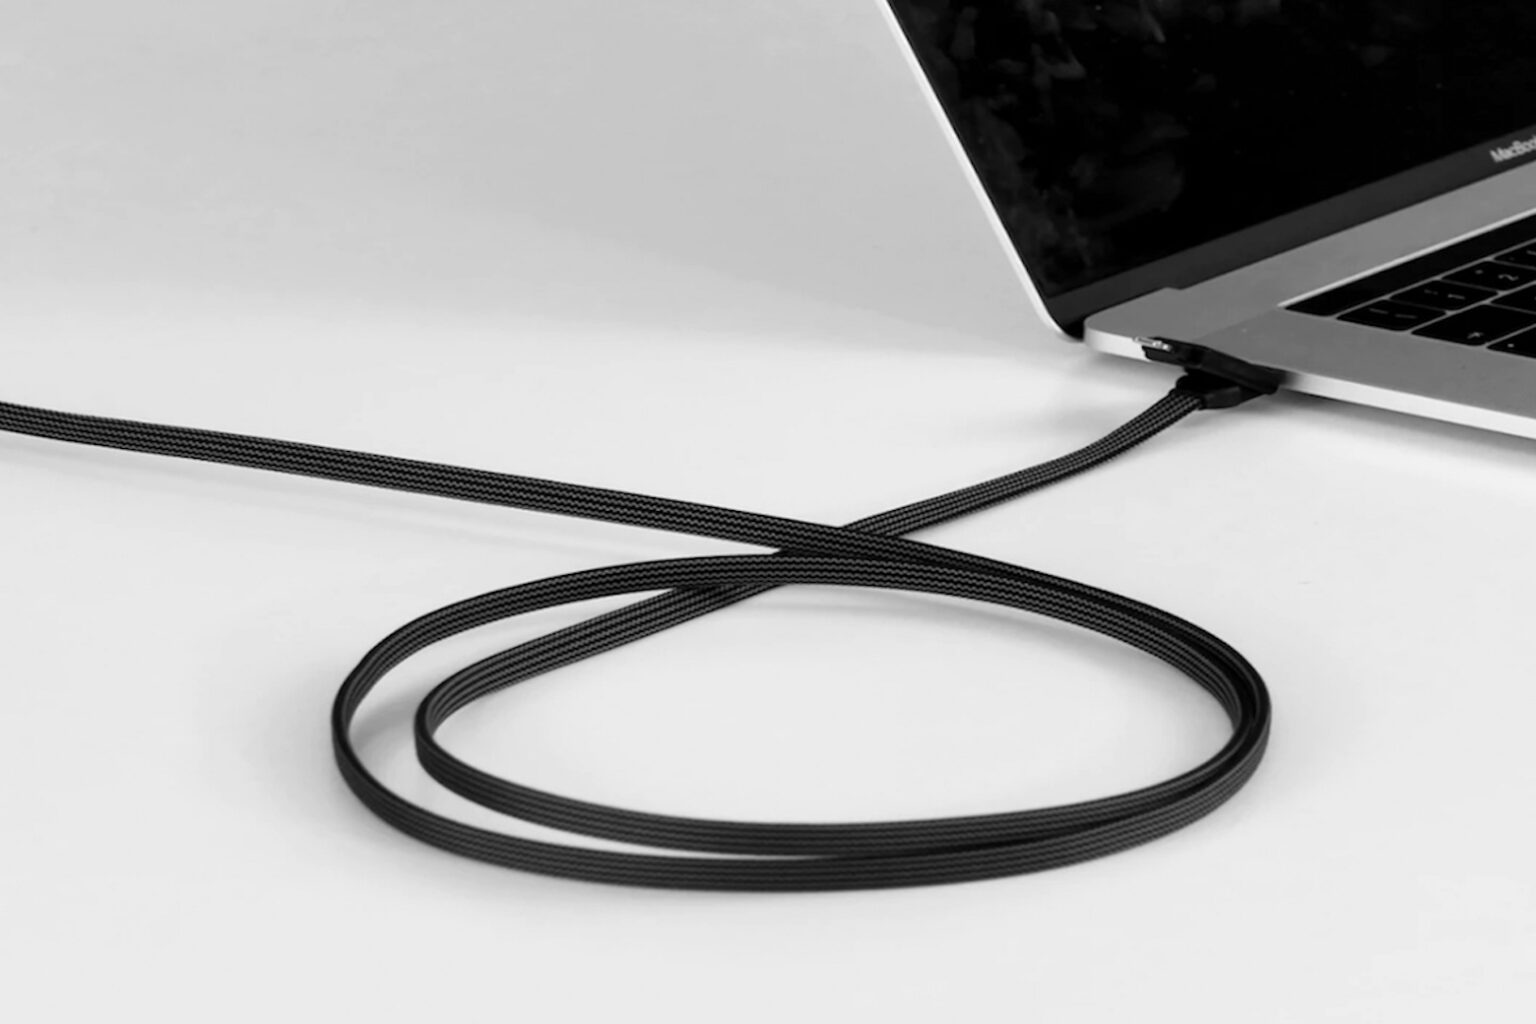 This 6-in-1 charging cable is only $21.99.